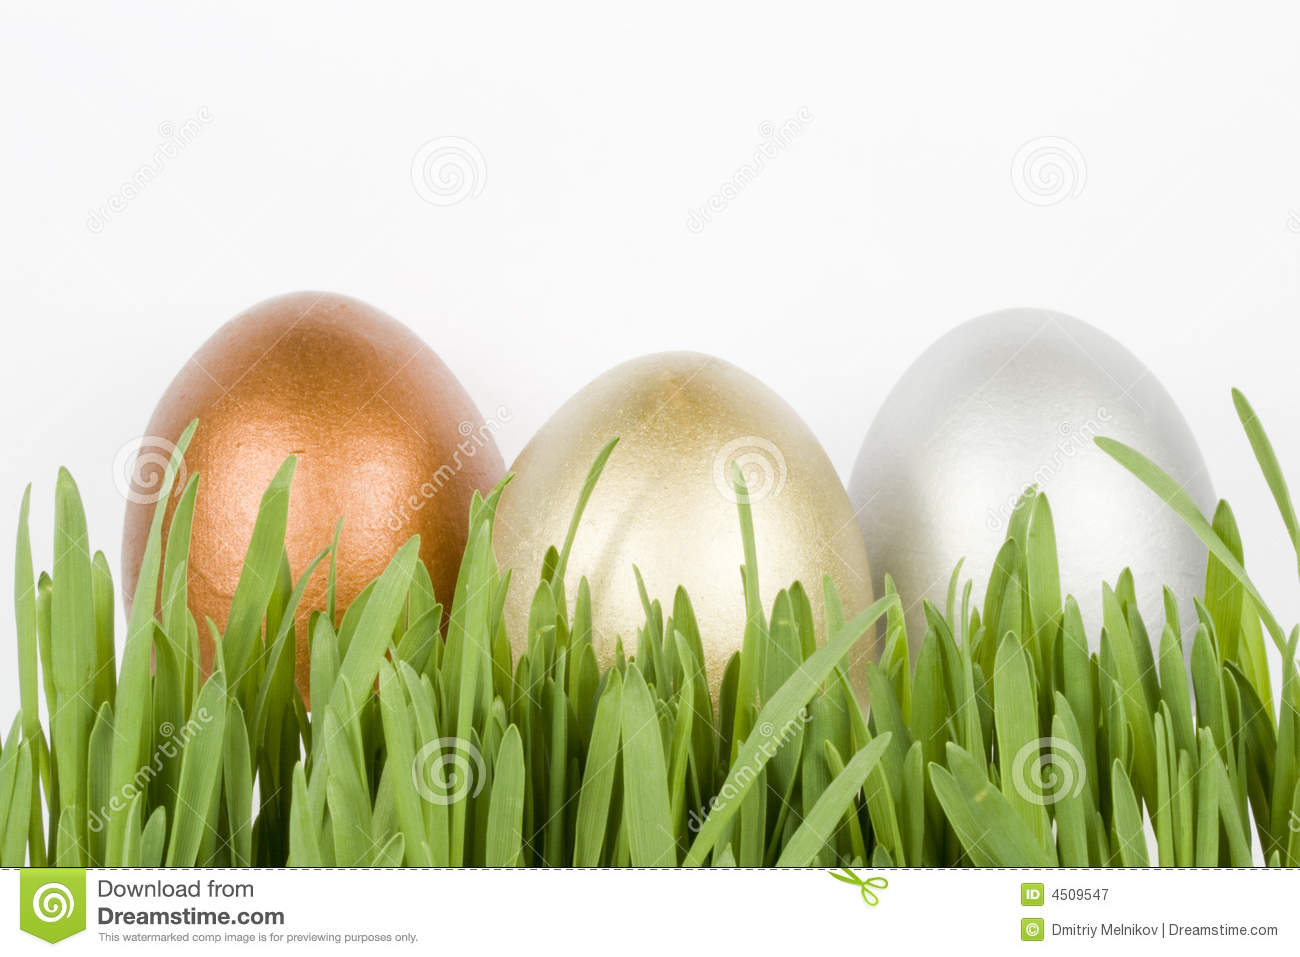 Gold Silver And Bronze Eggs Royalty Free Stock Photography   Image